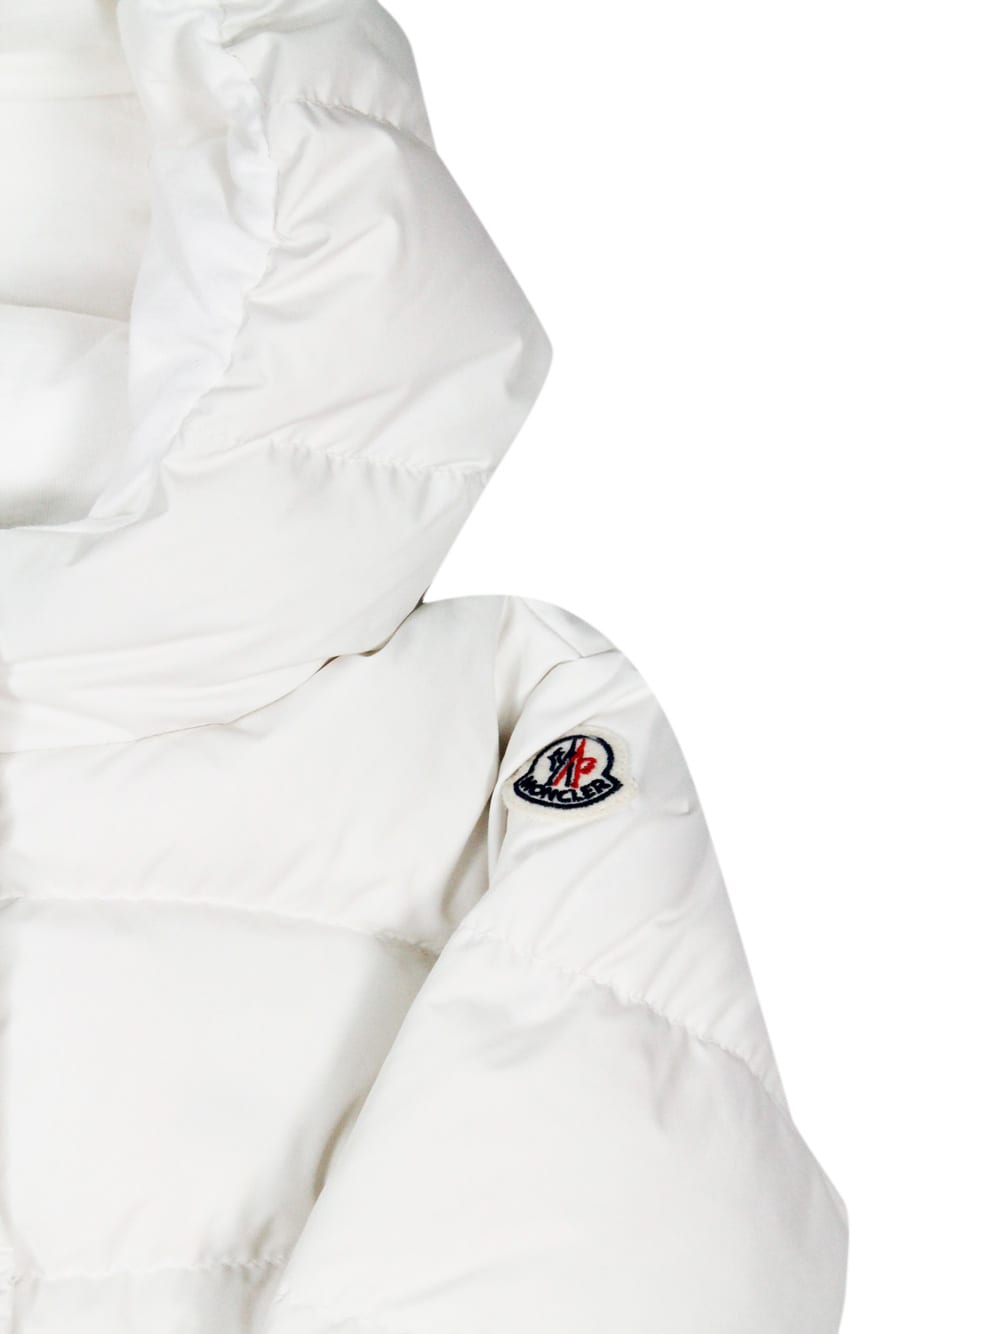 Shop Moncler Ebre Down Jacket Padded With Real White Goose Down With Hood, Zip And Snap Button Closure And Front 